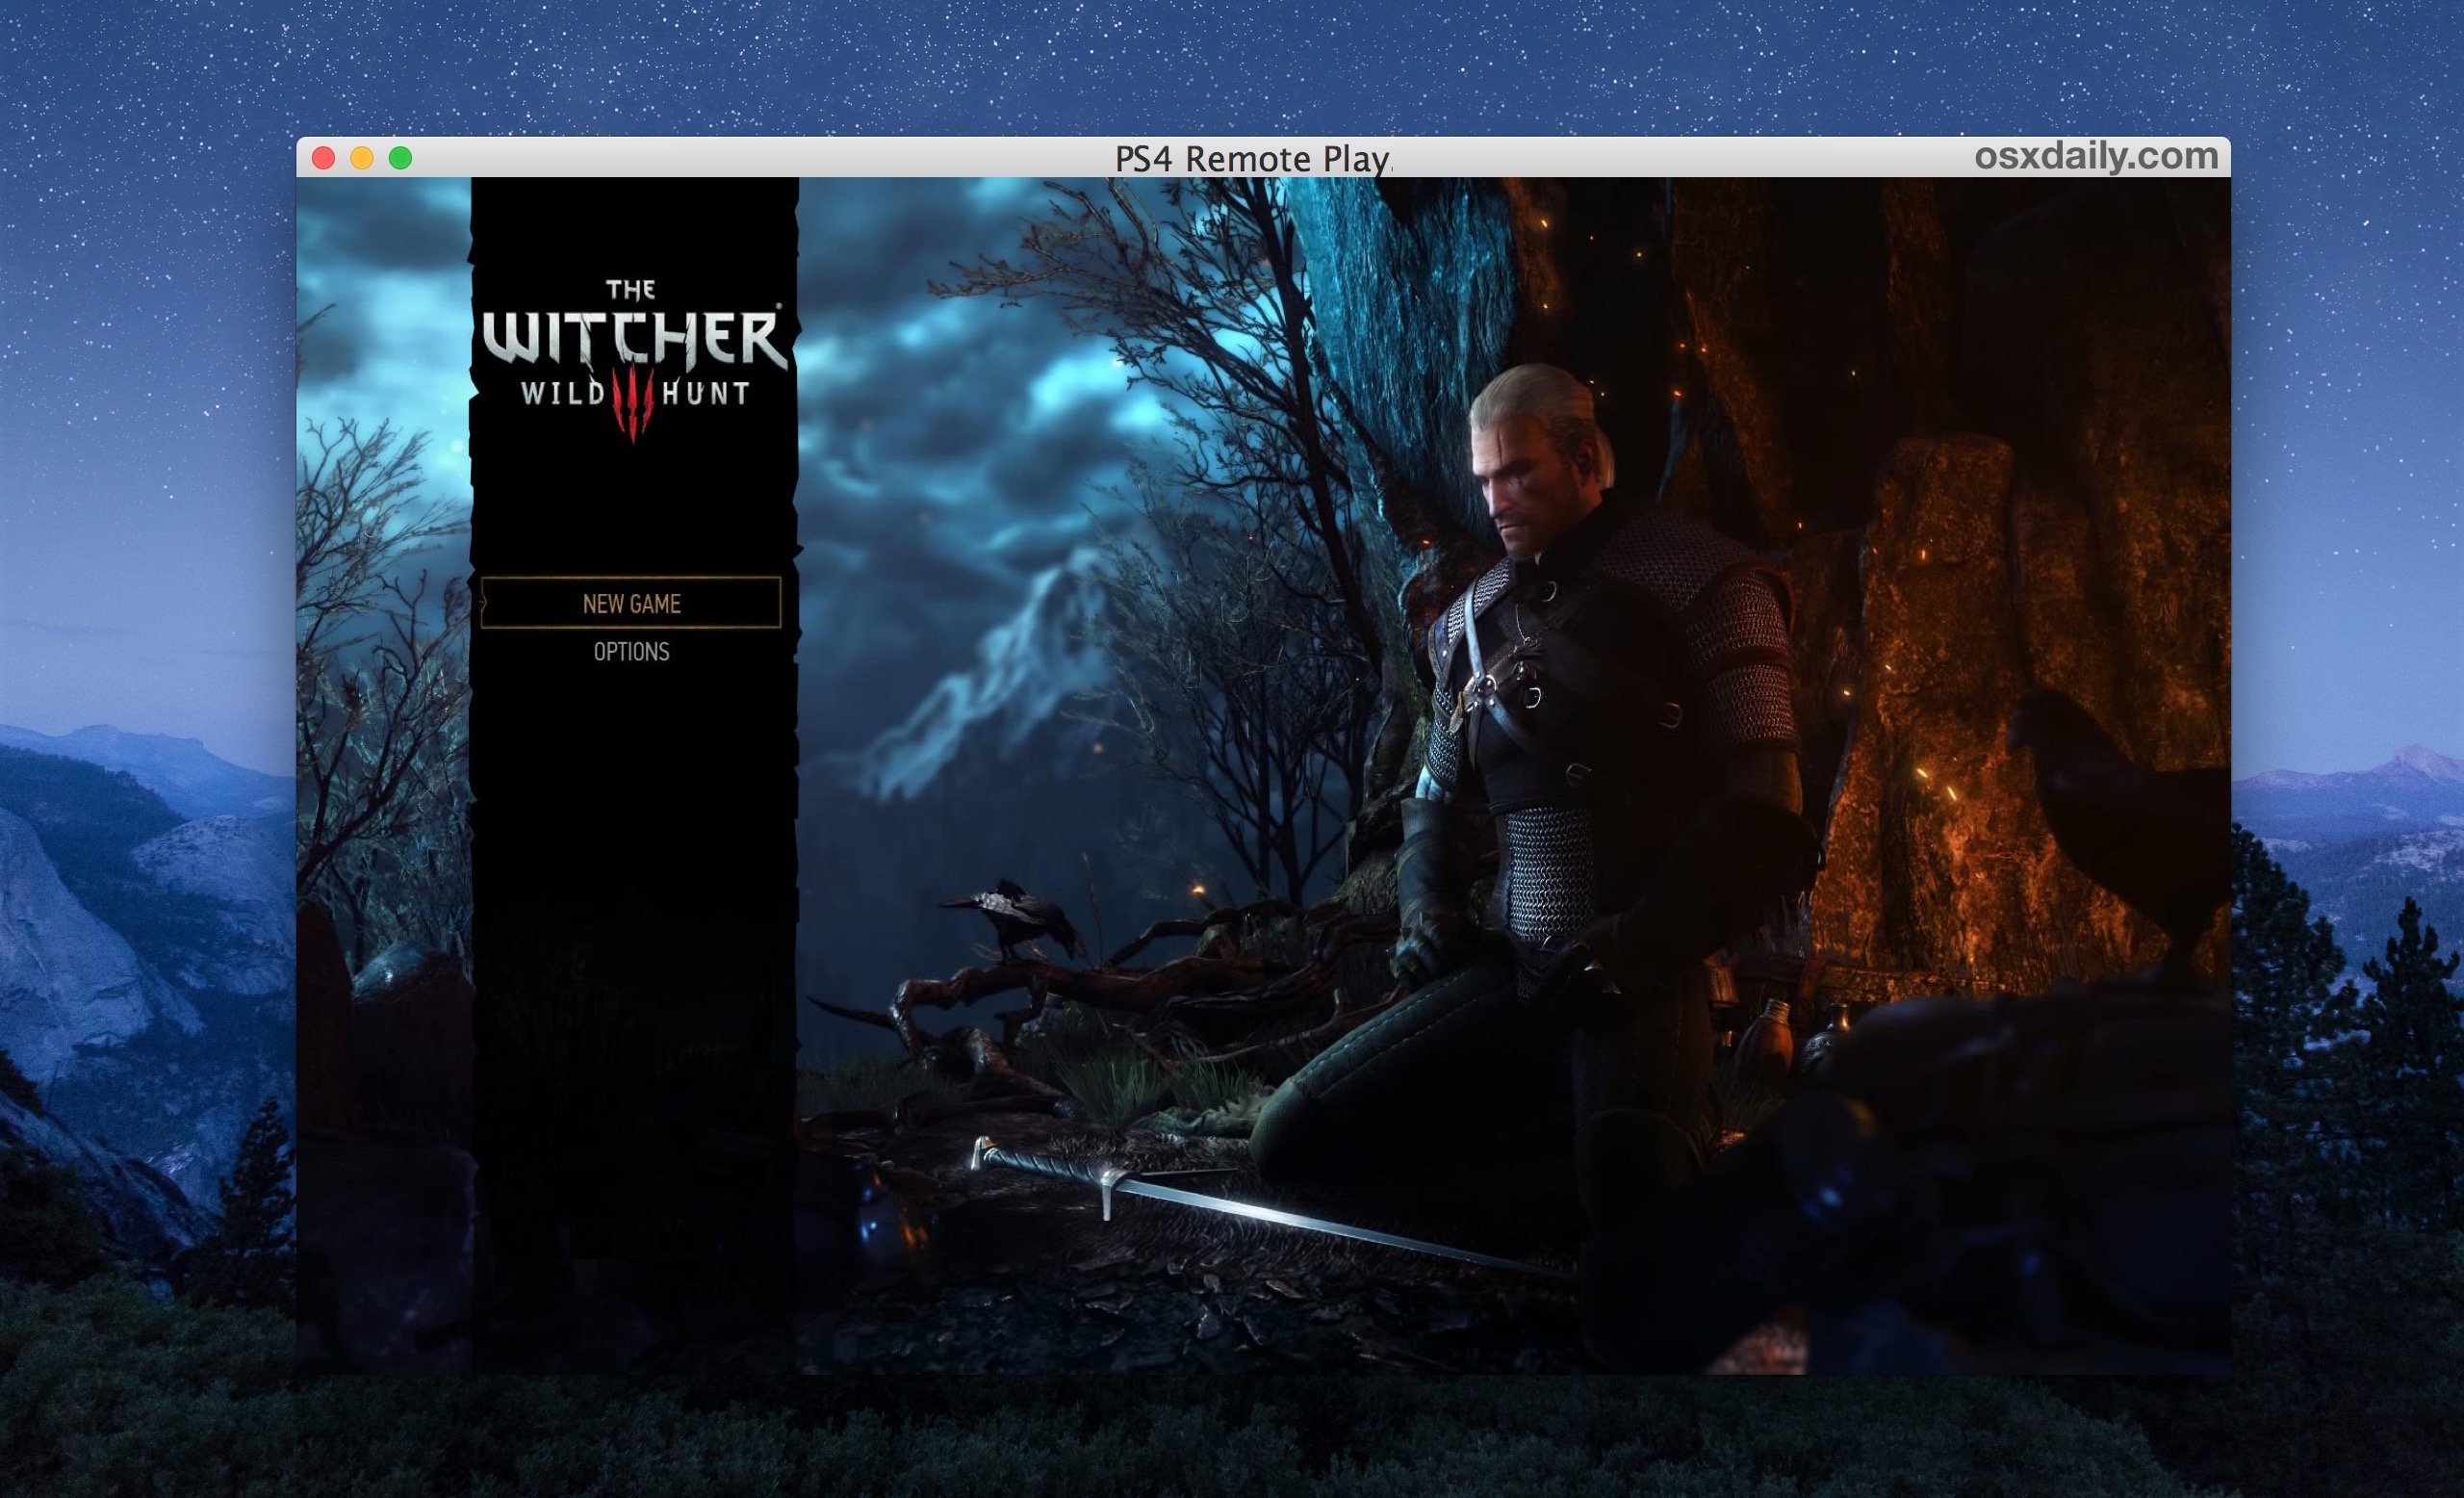 Play Playstation 4 Games on Mac (or Windows) with PS4 Remote Play